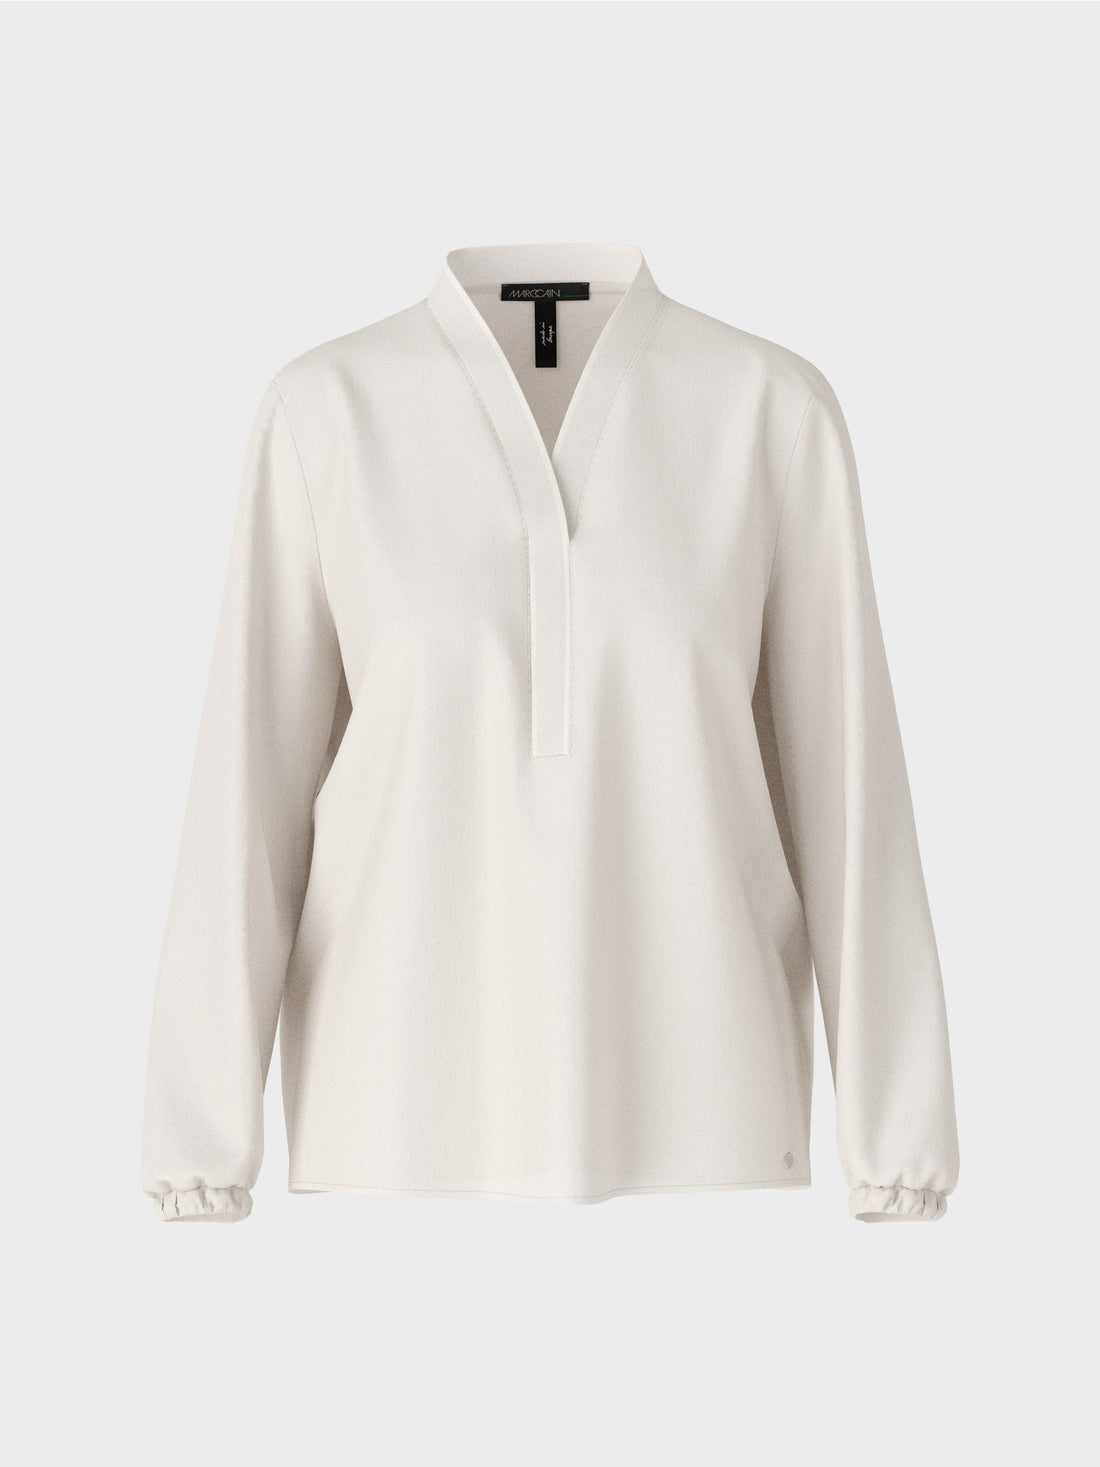 Blouse With V-Neck_WA 51.03 W39_182_01